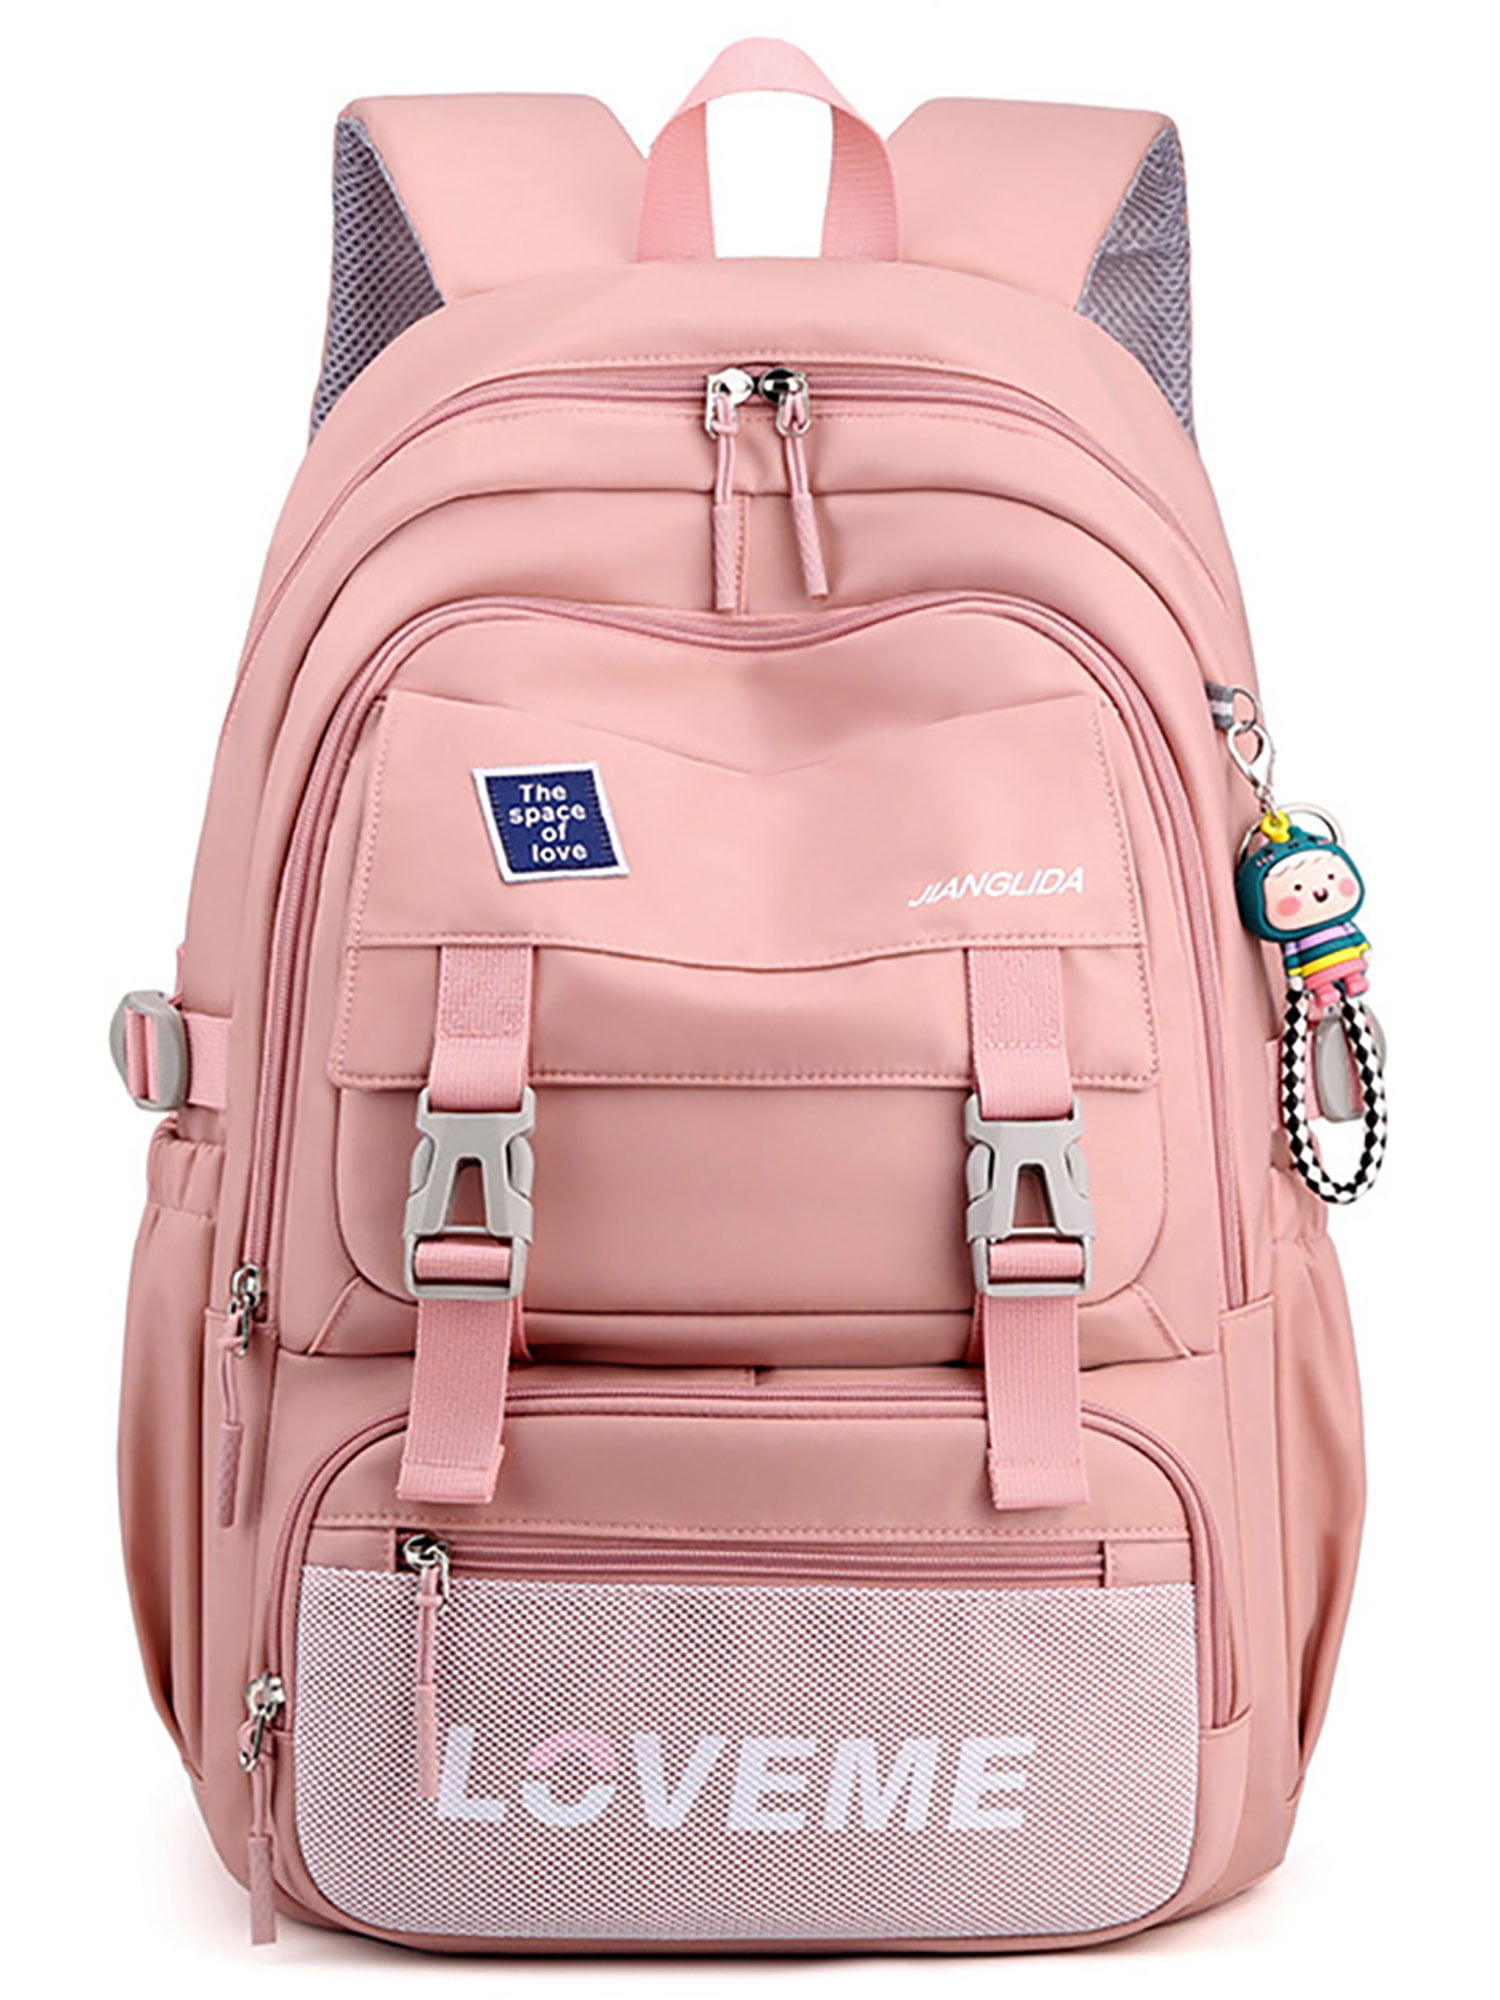 Adult Casual Backpack School Bags Oxford Laptop Backpack Unisex Travel Daypack